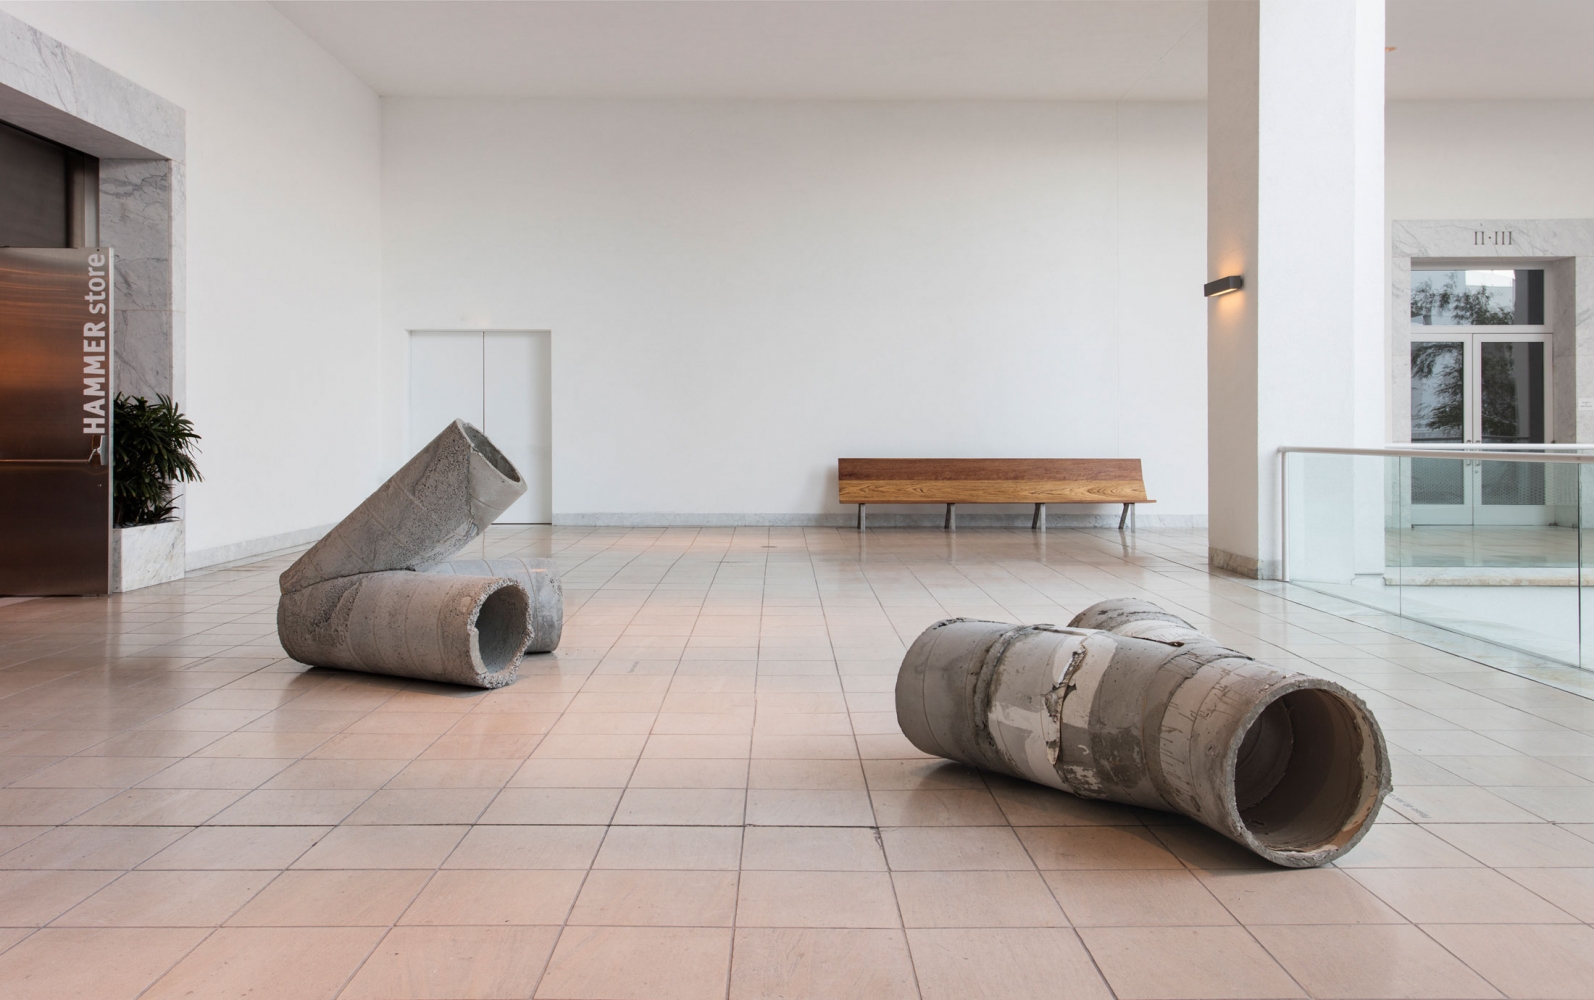 Oscar Tuazon
Pipe Prototype, 2015
Fiberglass, concrete, sonotube
21 1/4 x 49 1/2 x 61 inches
(54 x 125.5 x 155 cm)
February 6 &amp;ndash; May 22, 2016
Installation view of&amp;nbsp;Hammer Projects: Oscar Tuazon&amp;nbsp;at the&amp;nbsp;Hammer Museum, Los Angeles
Photo: Brian Forrest